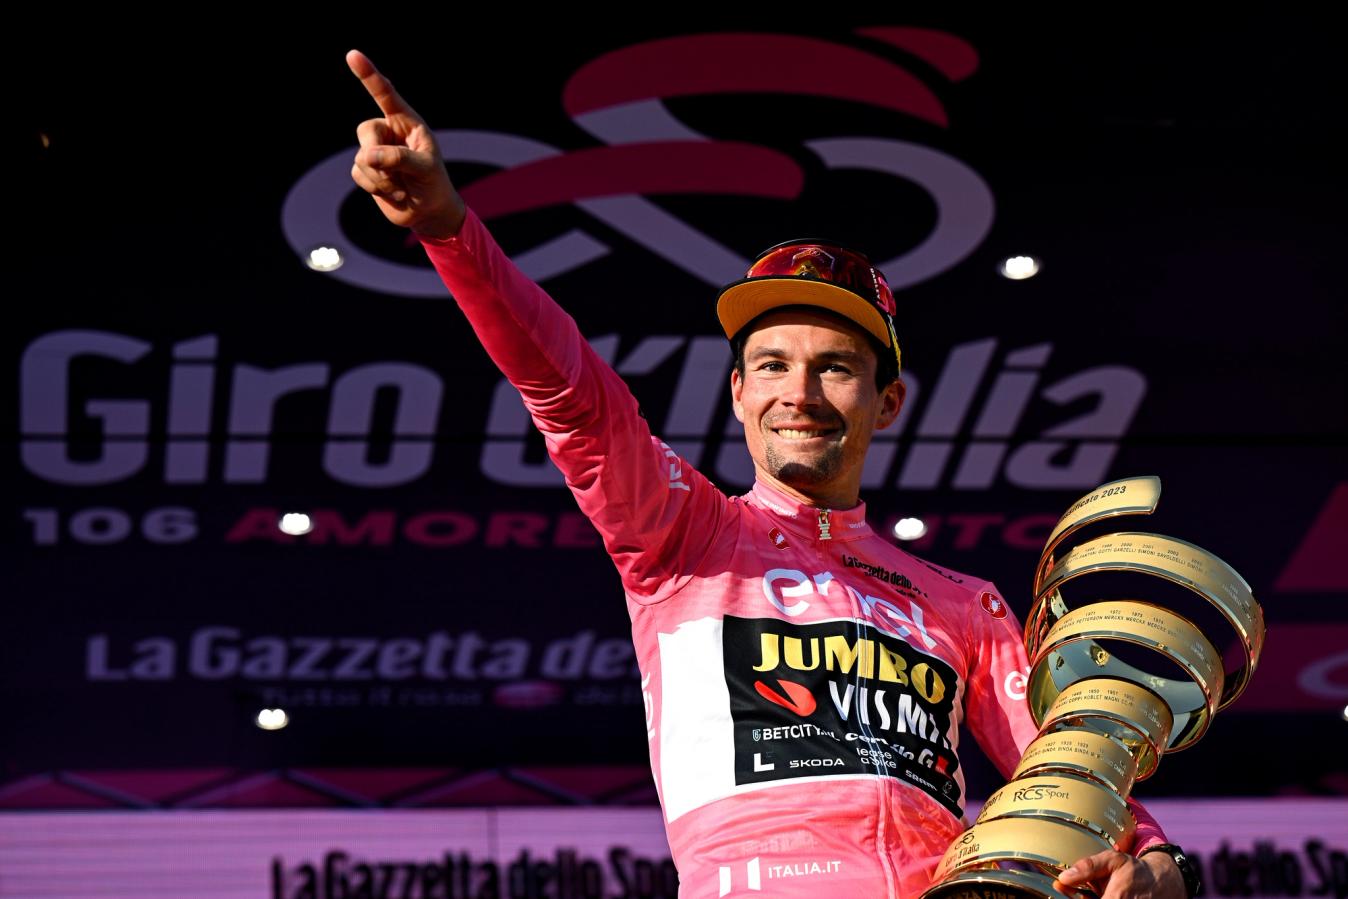 The pink jersey is the central icon of the Giro d'Italia